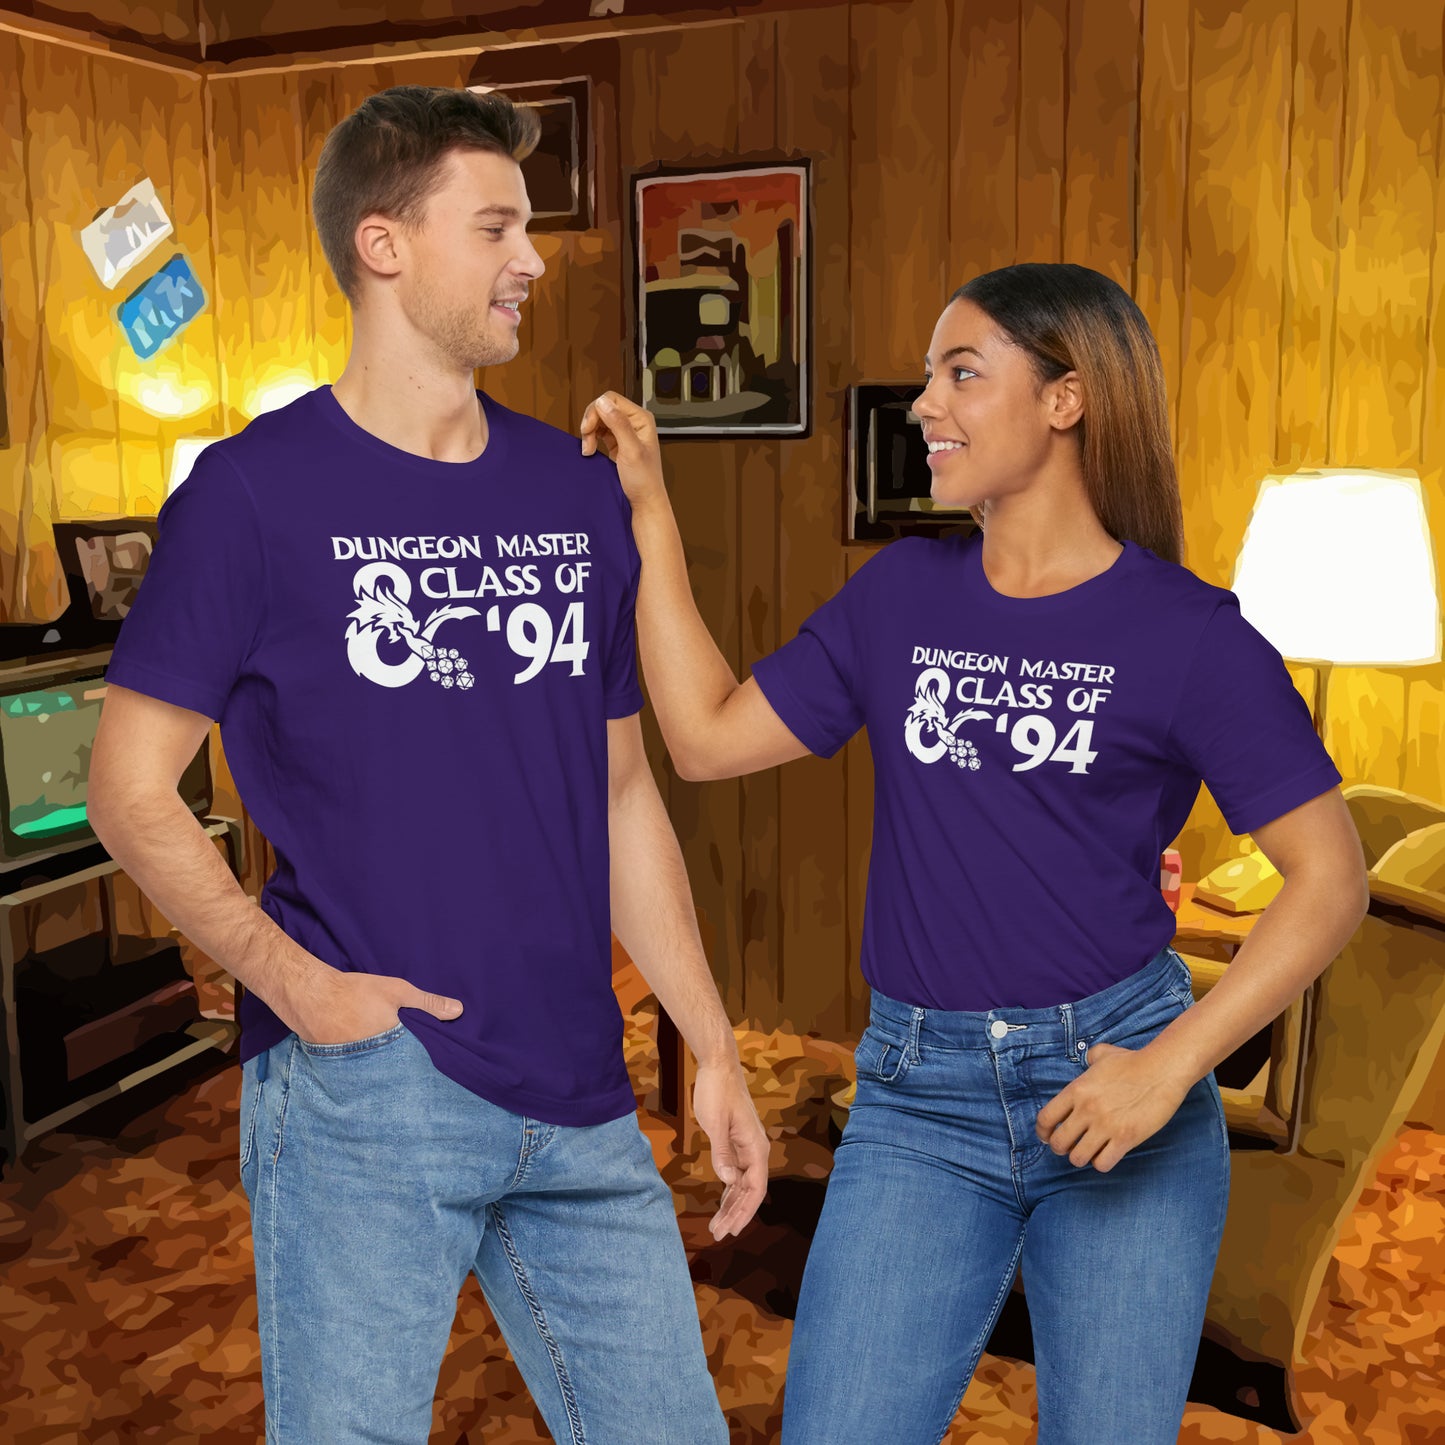 Dungeon Master Class of '94 Tee